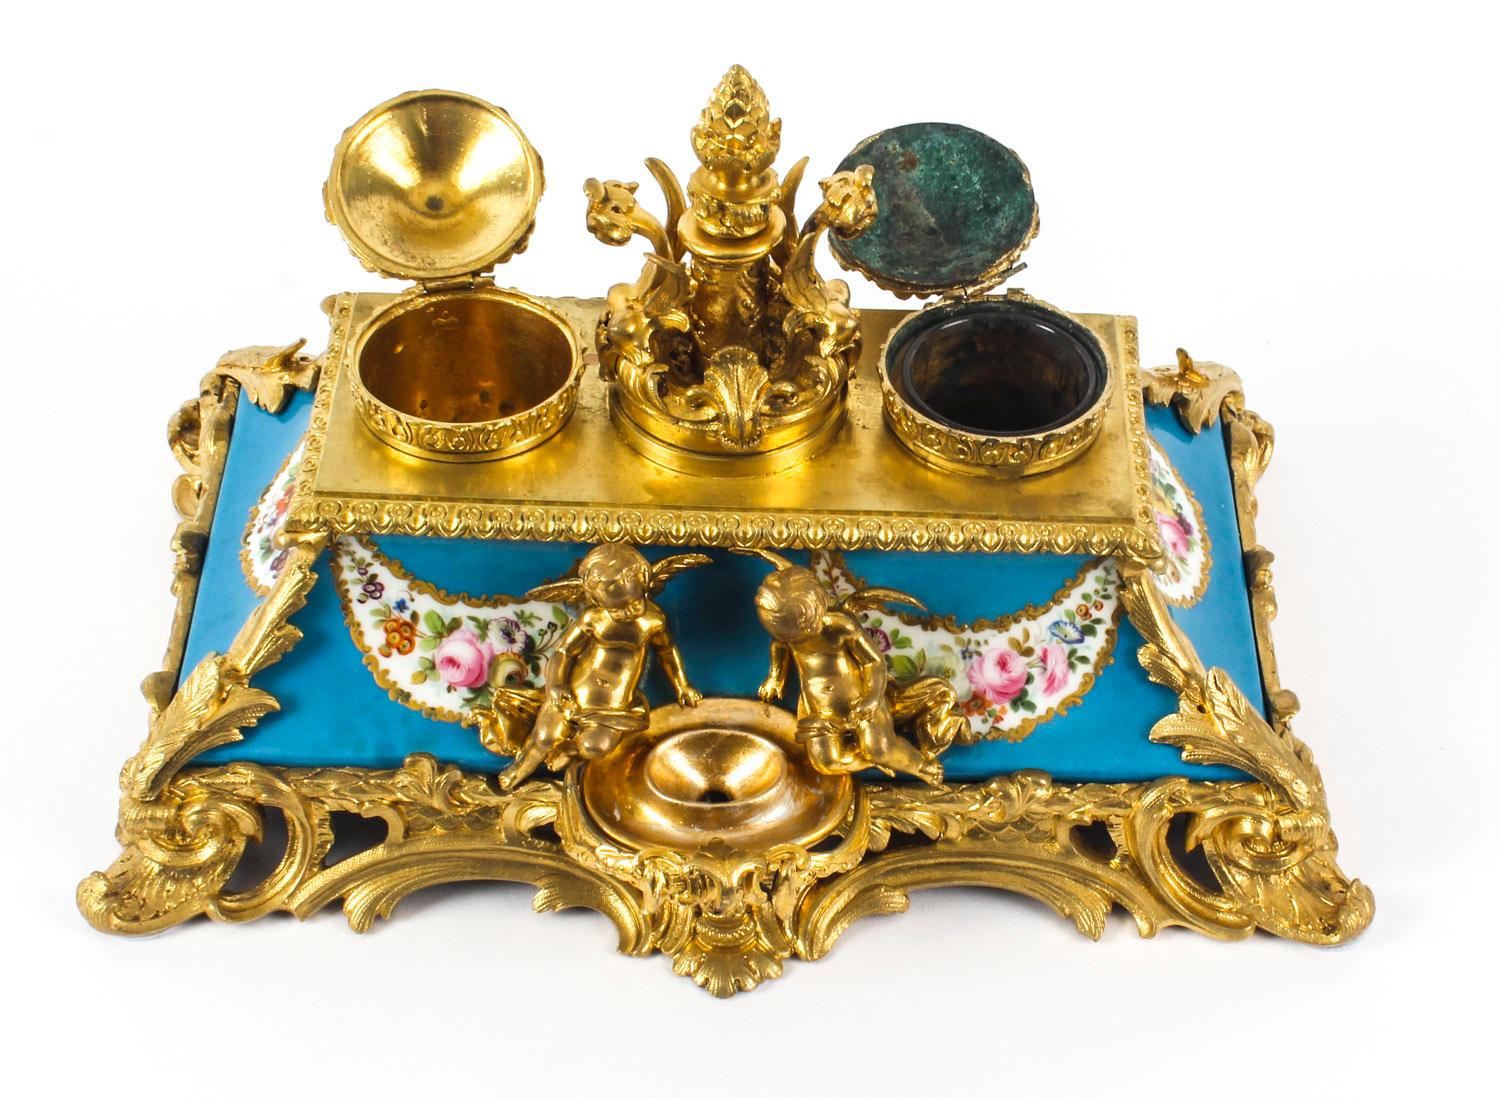 Antique French Ormolu and Sèvres Porcelain Standish Inkstand, 19th Century 6